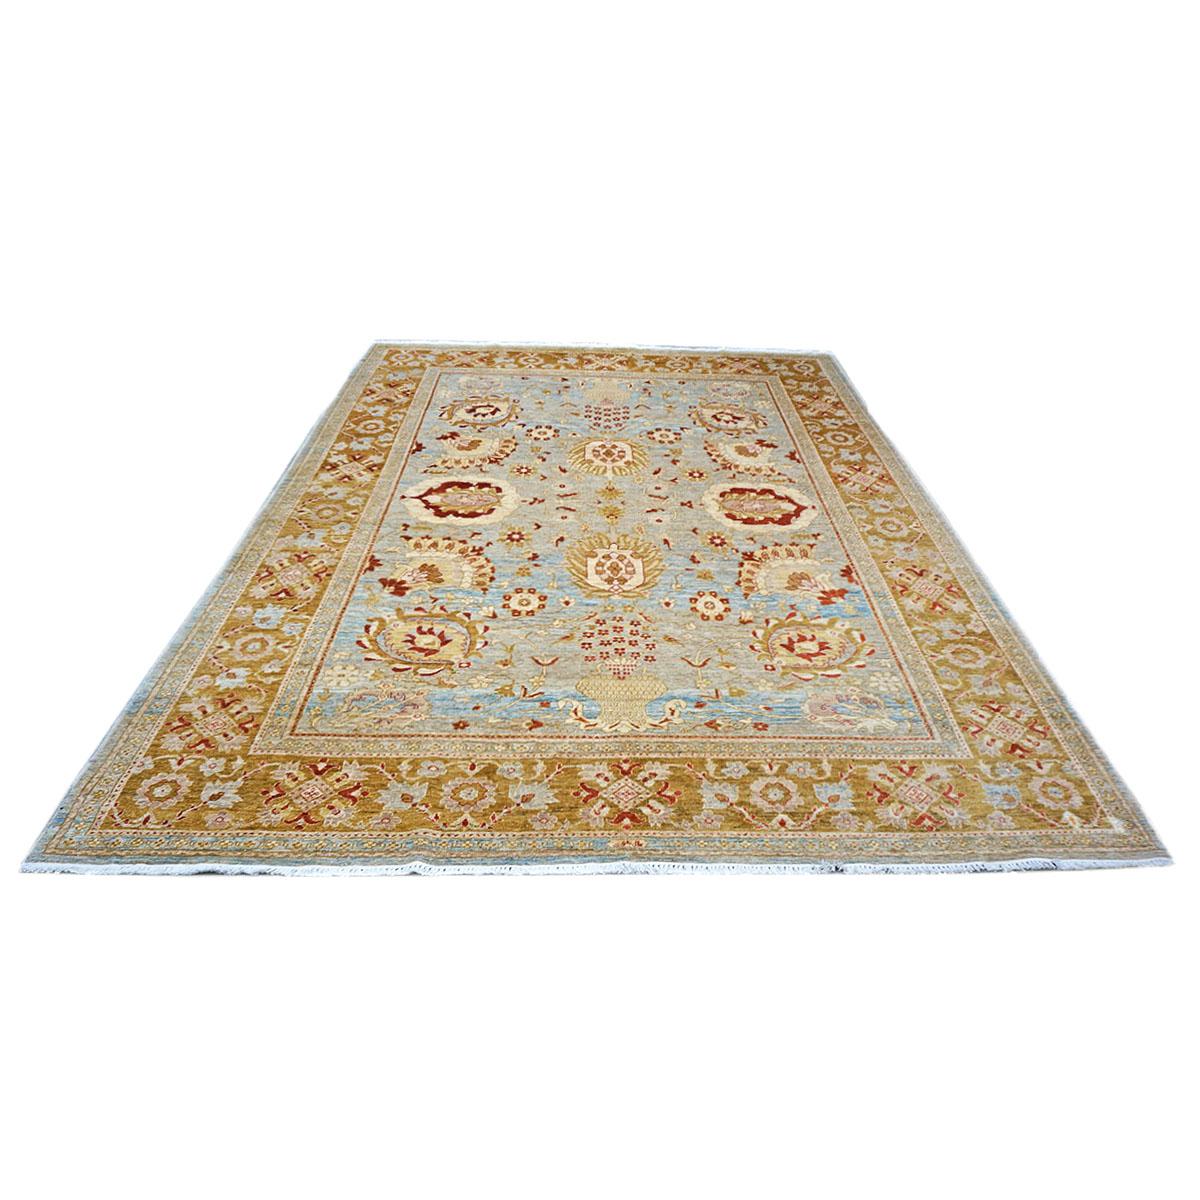 Ashly Fine Rugs presents this beautiful Afghan Oushak 9x12 Blue & Gold Handmade Area Rug. As part of our own previous production, this piece was thought of and created in-house and handmade in Afghanistan by master weavers. This elegant piece has a